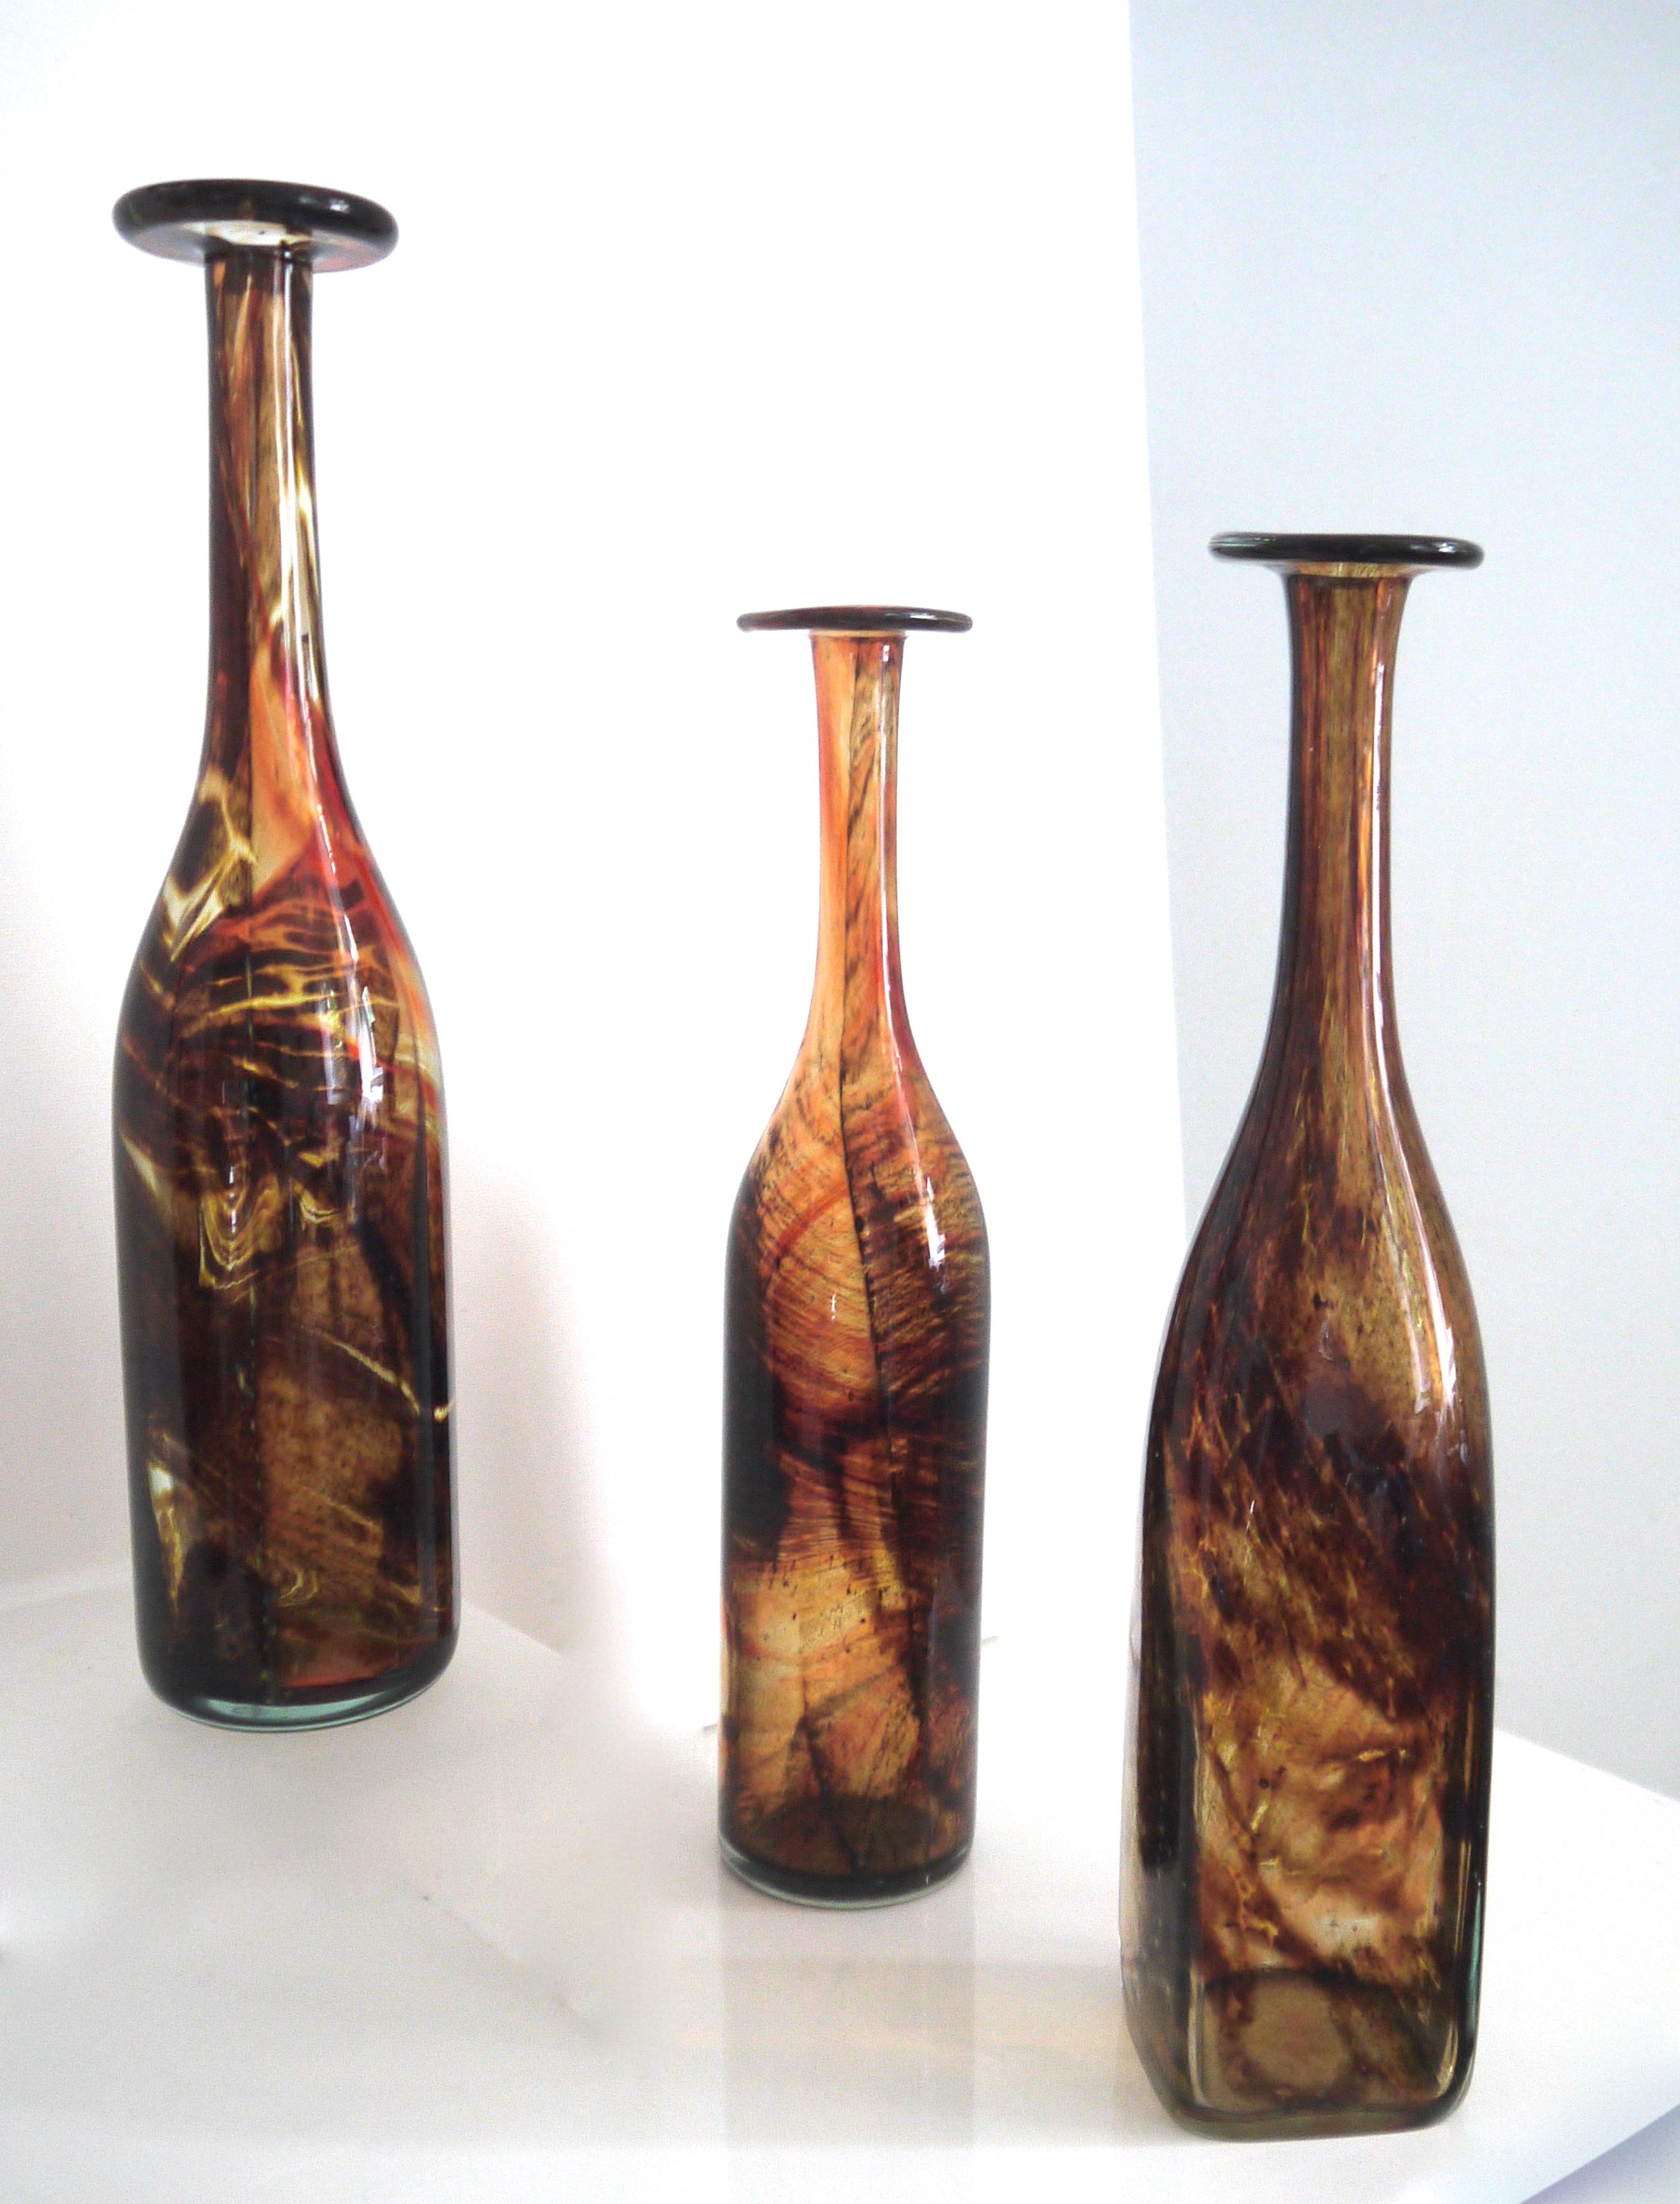 Mid-Century Modern (MCM)Vintage glass bottles Mdina/Isle of white - Tortoisehell Signed Late 1970s Michael Harris (1933- 1994) studied glass design during the 1950's at Stourbridge College of Art and at the Royal College of Art (RCA) The works of